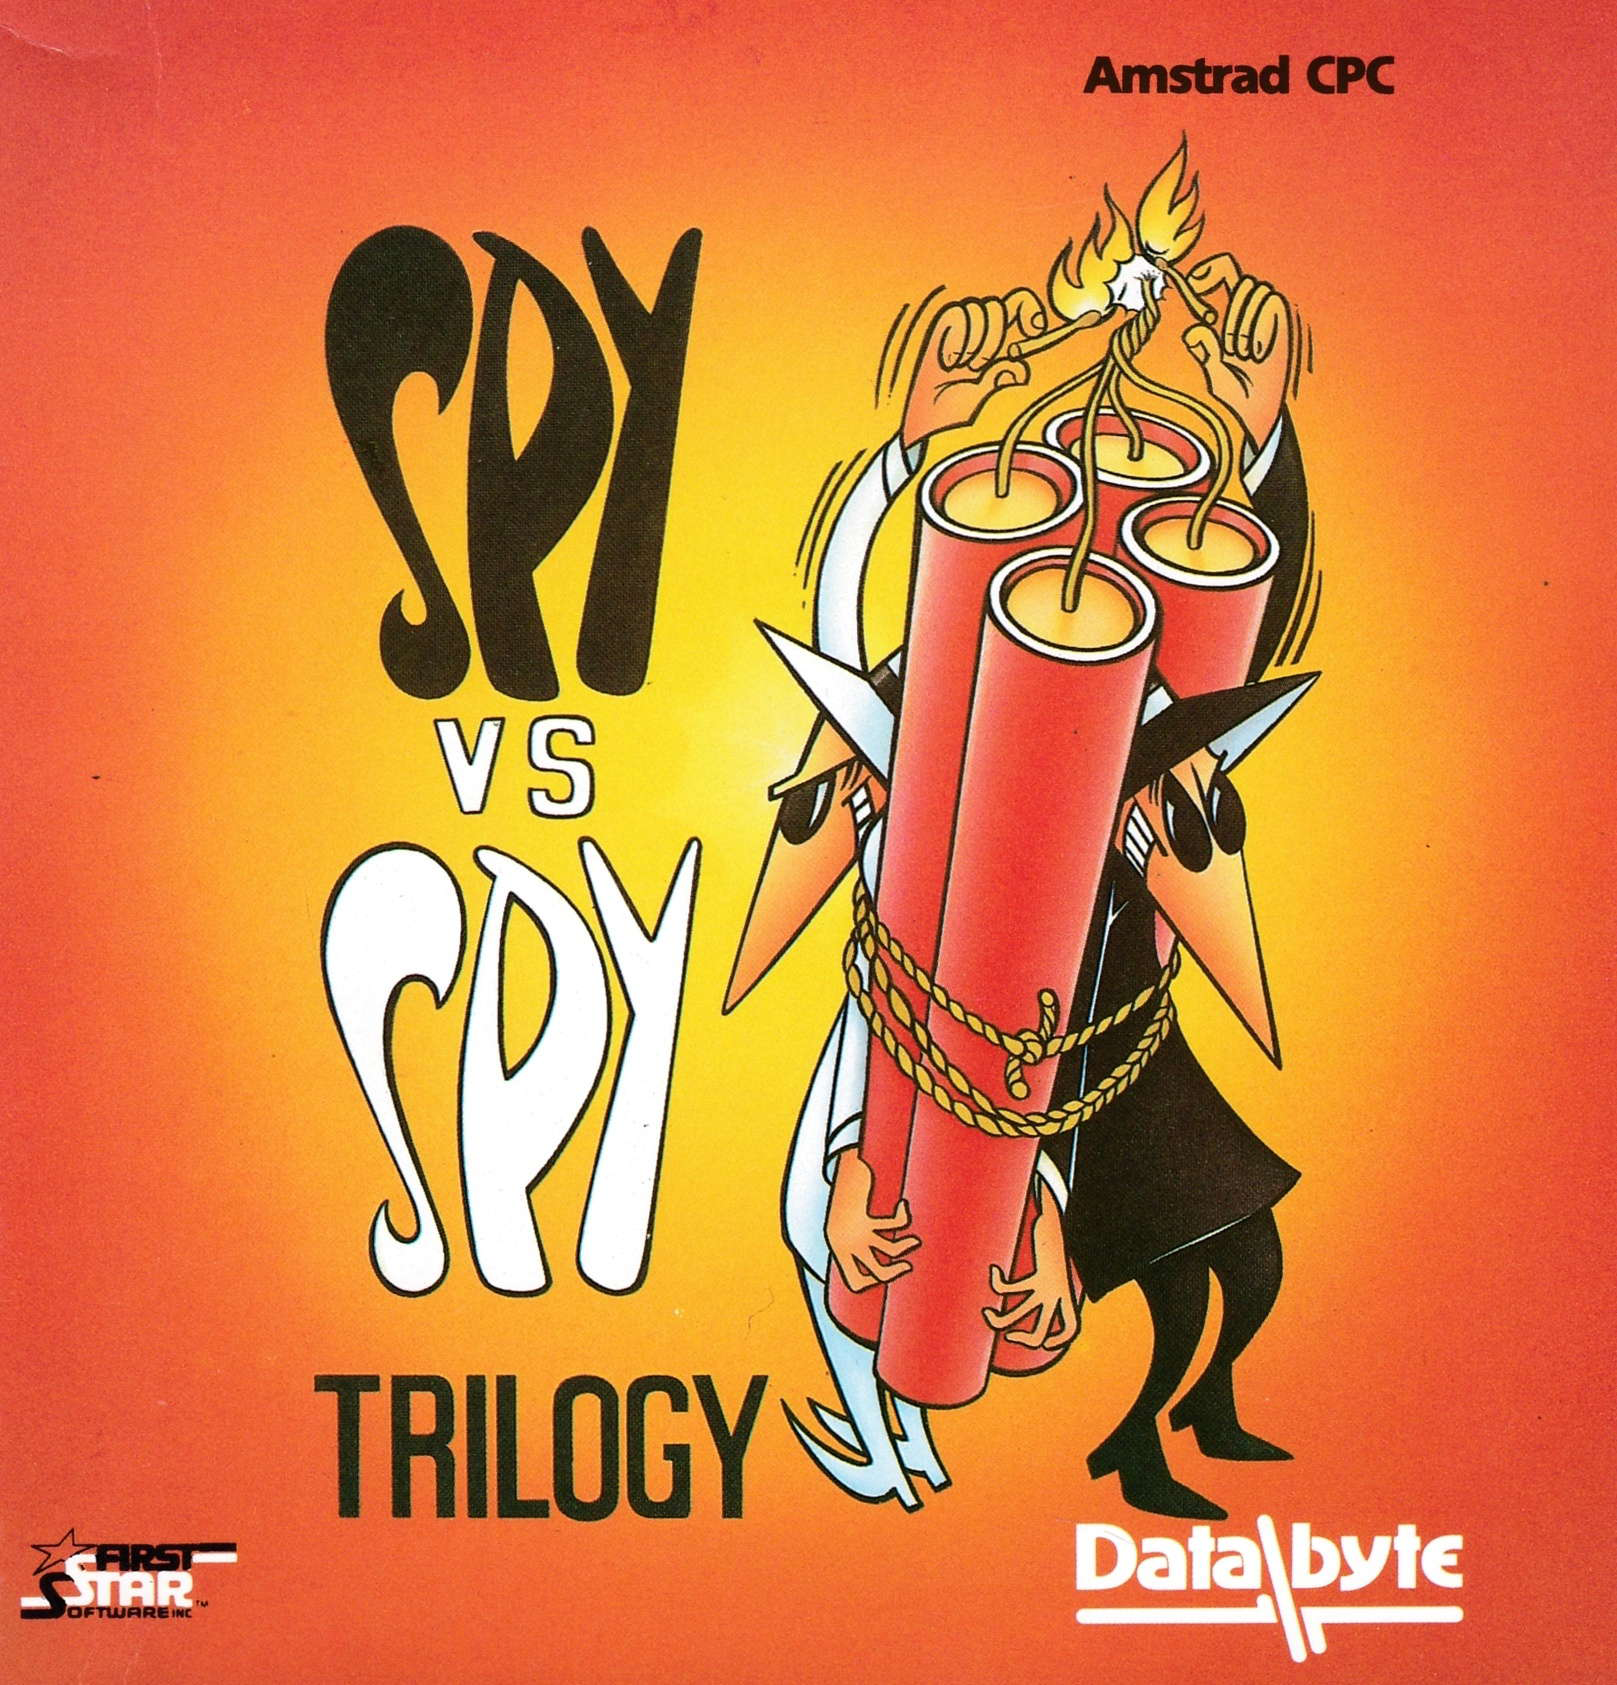 cover of the Amstrad CPC game Spy Vs Spy Trilogy  by GameBase CPC